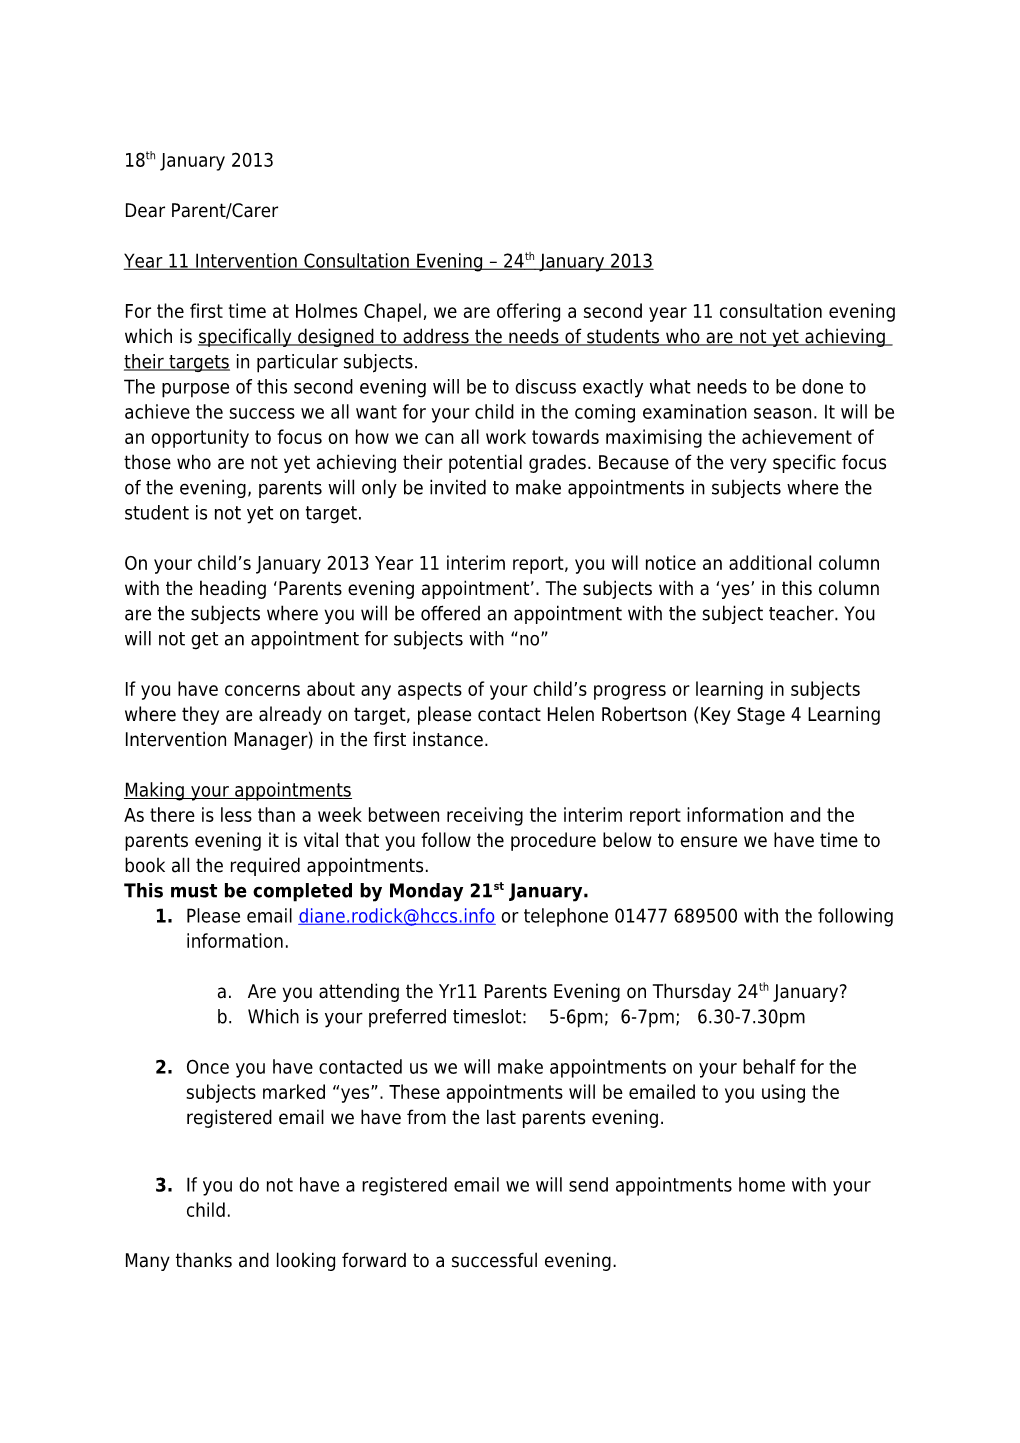 Year 11 Intervention Consultation Evening 24Th January 2013